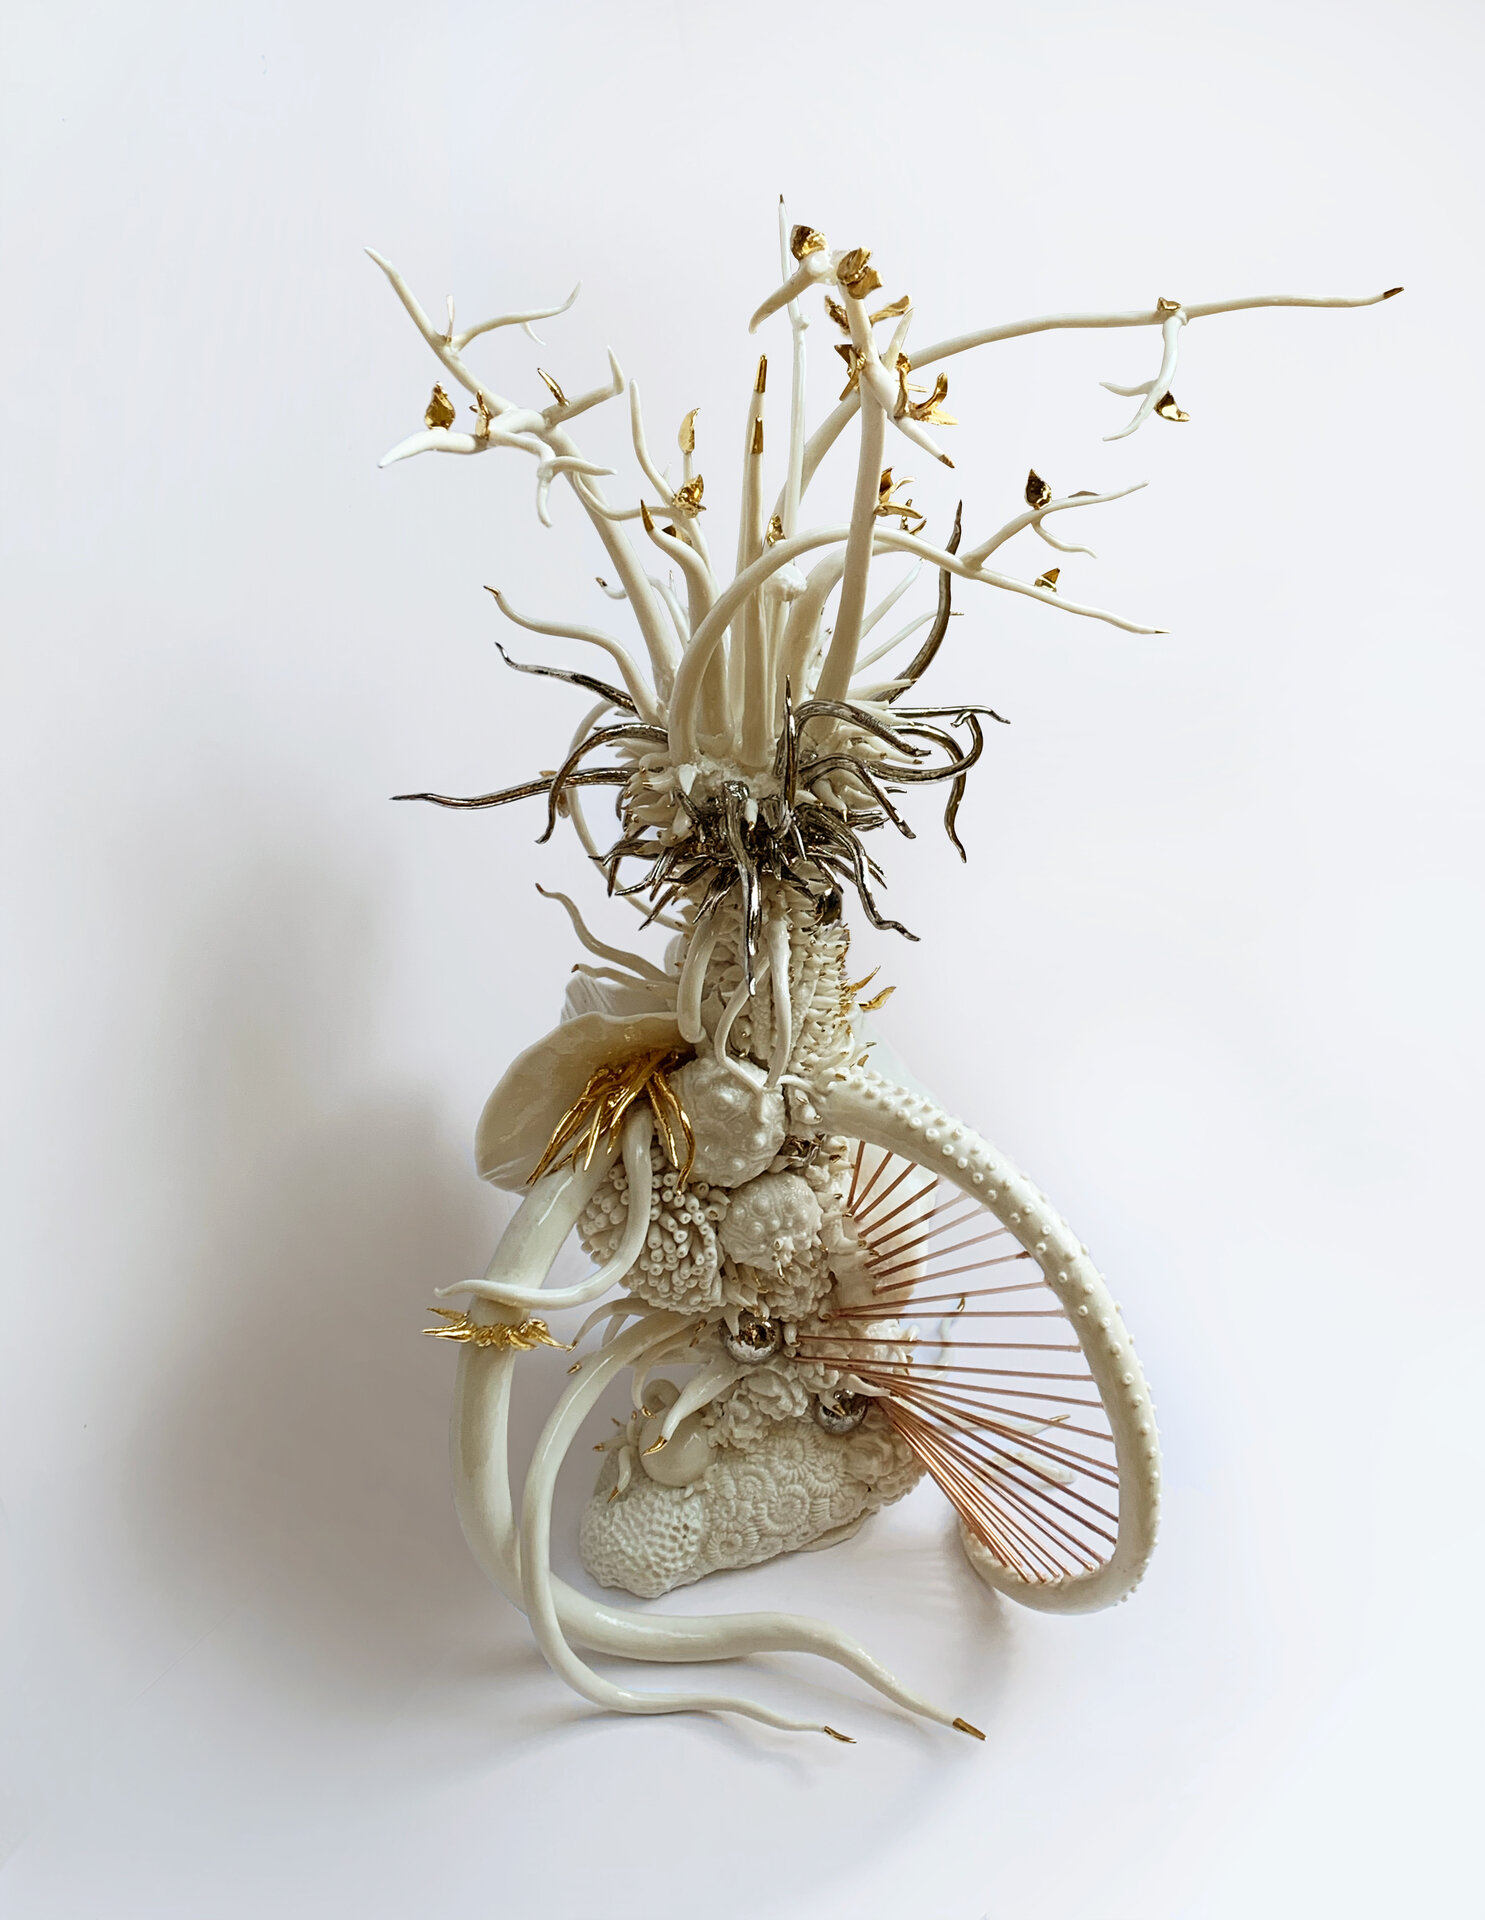   Saba Besier  “Intrepid Growth” 22.5” x 12” x 12”; Porcelain, gold, white gold and copper $3600. 